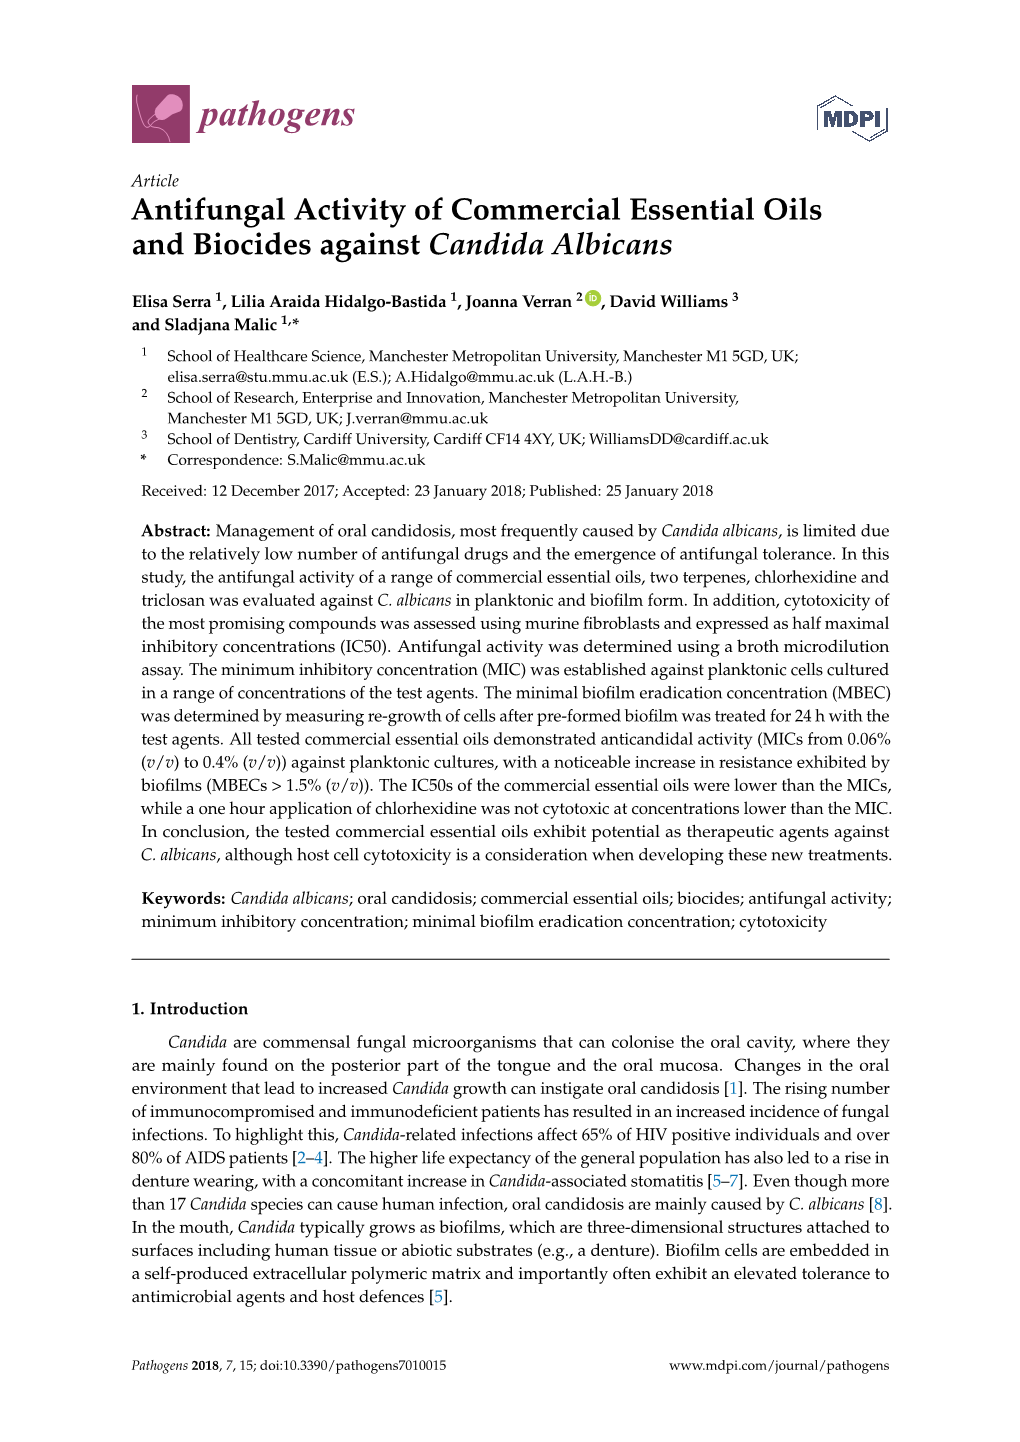 Antifungal Activity of Commercial Essential Oils and Biocides Against Candida Albicans